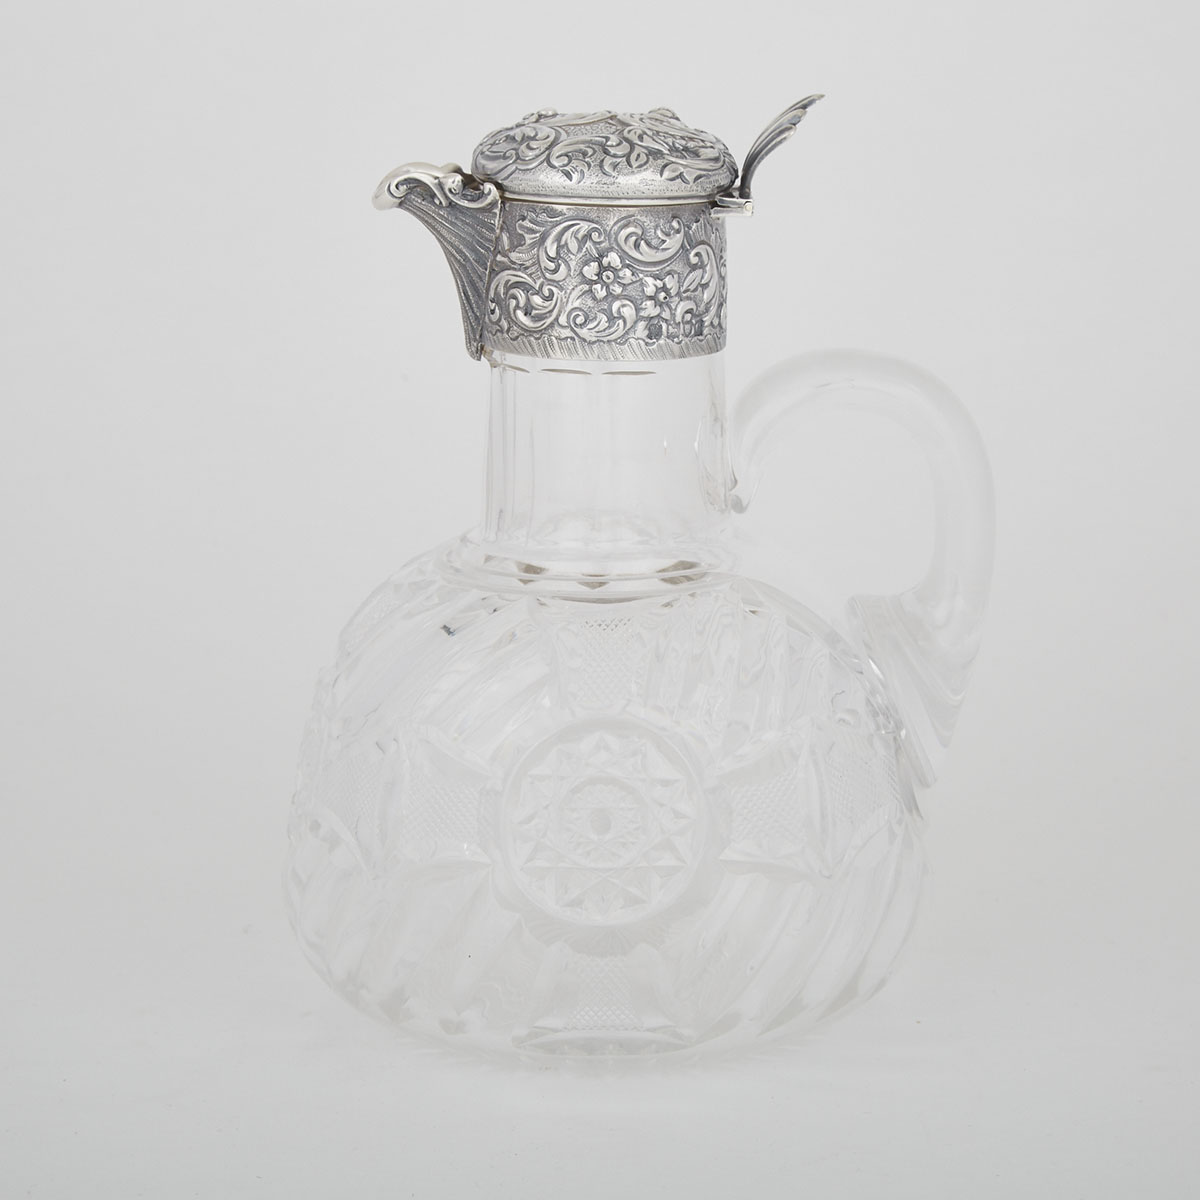 Late Victorian Silver Mounted Cut Glass Claret Jug, William & George Neal, London, 1898